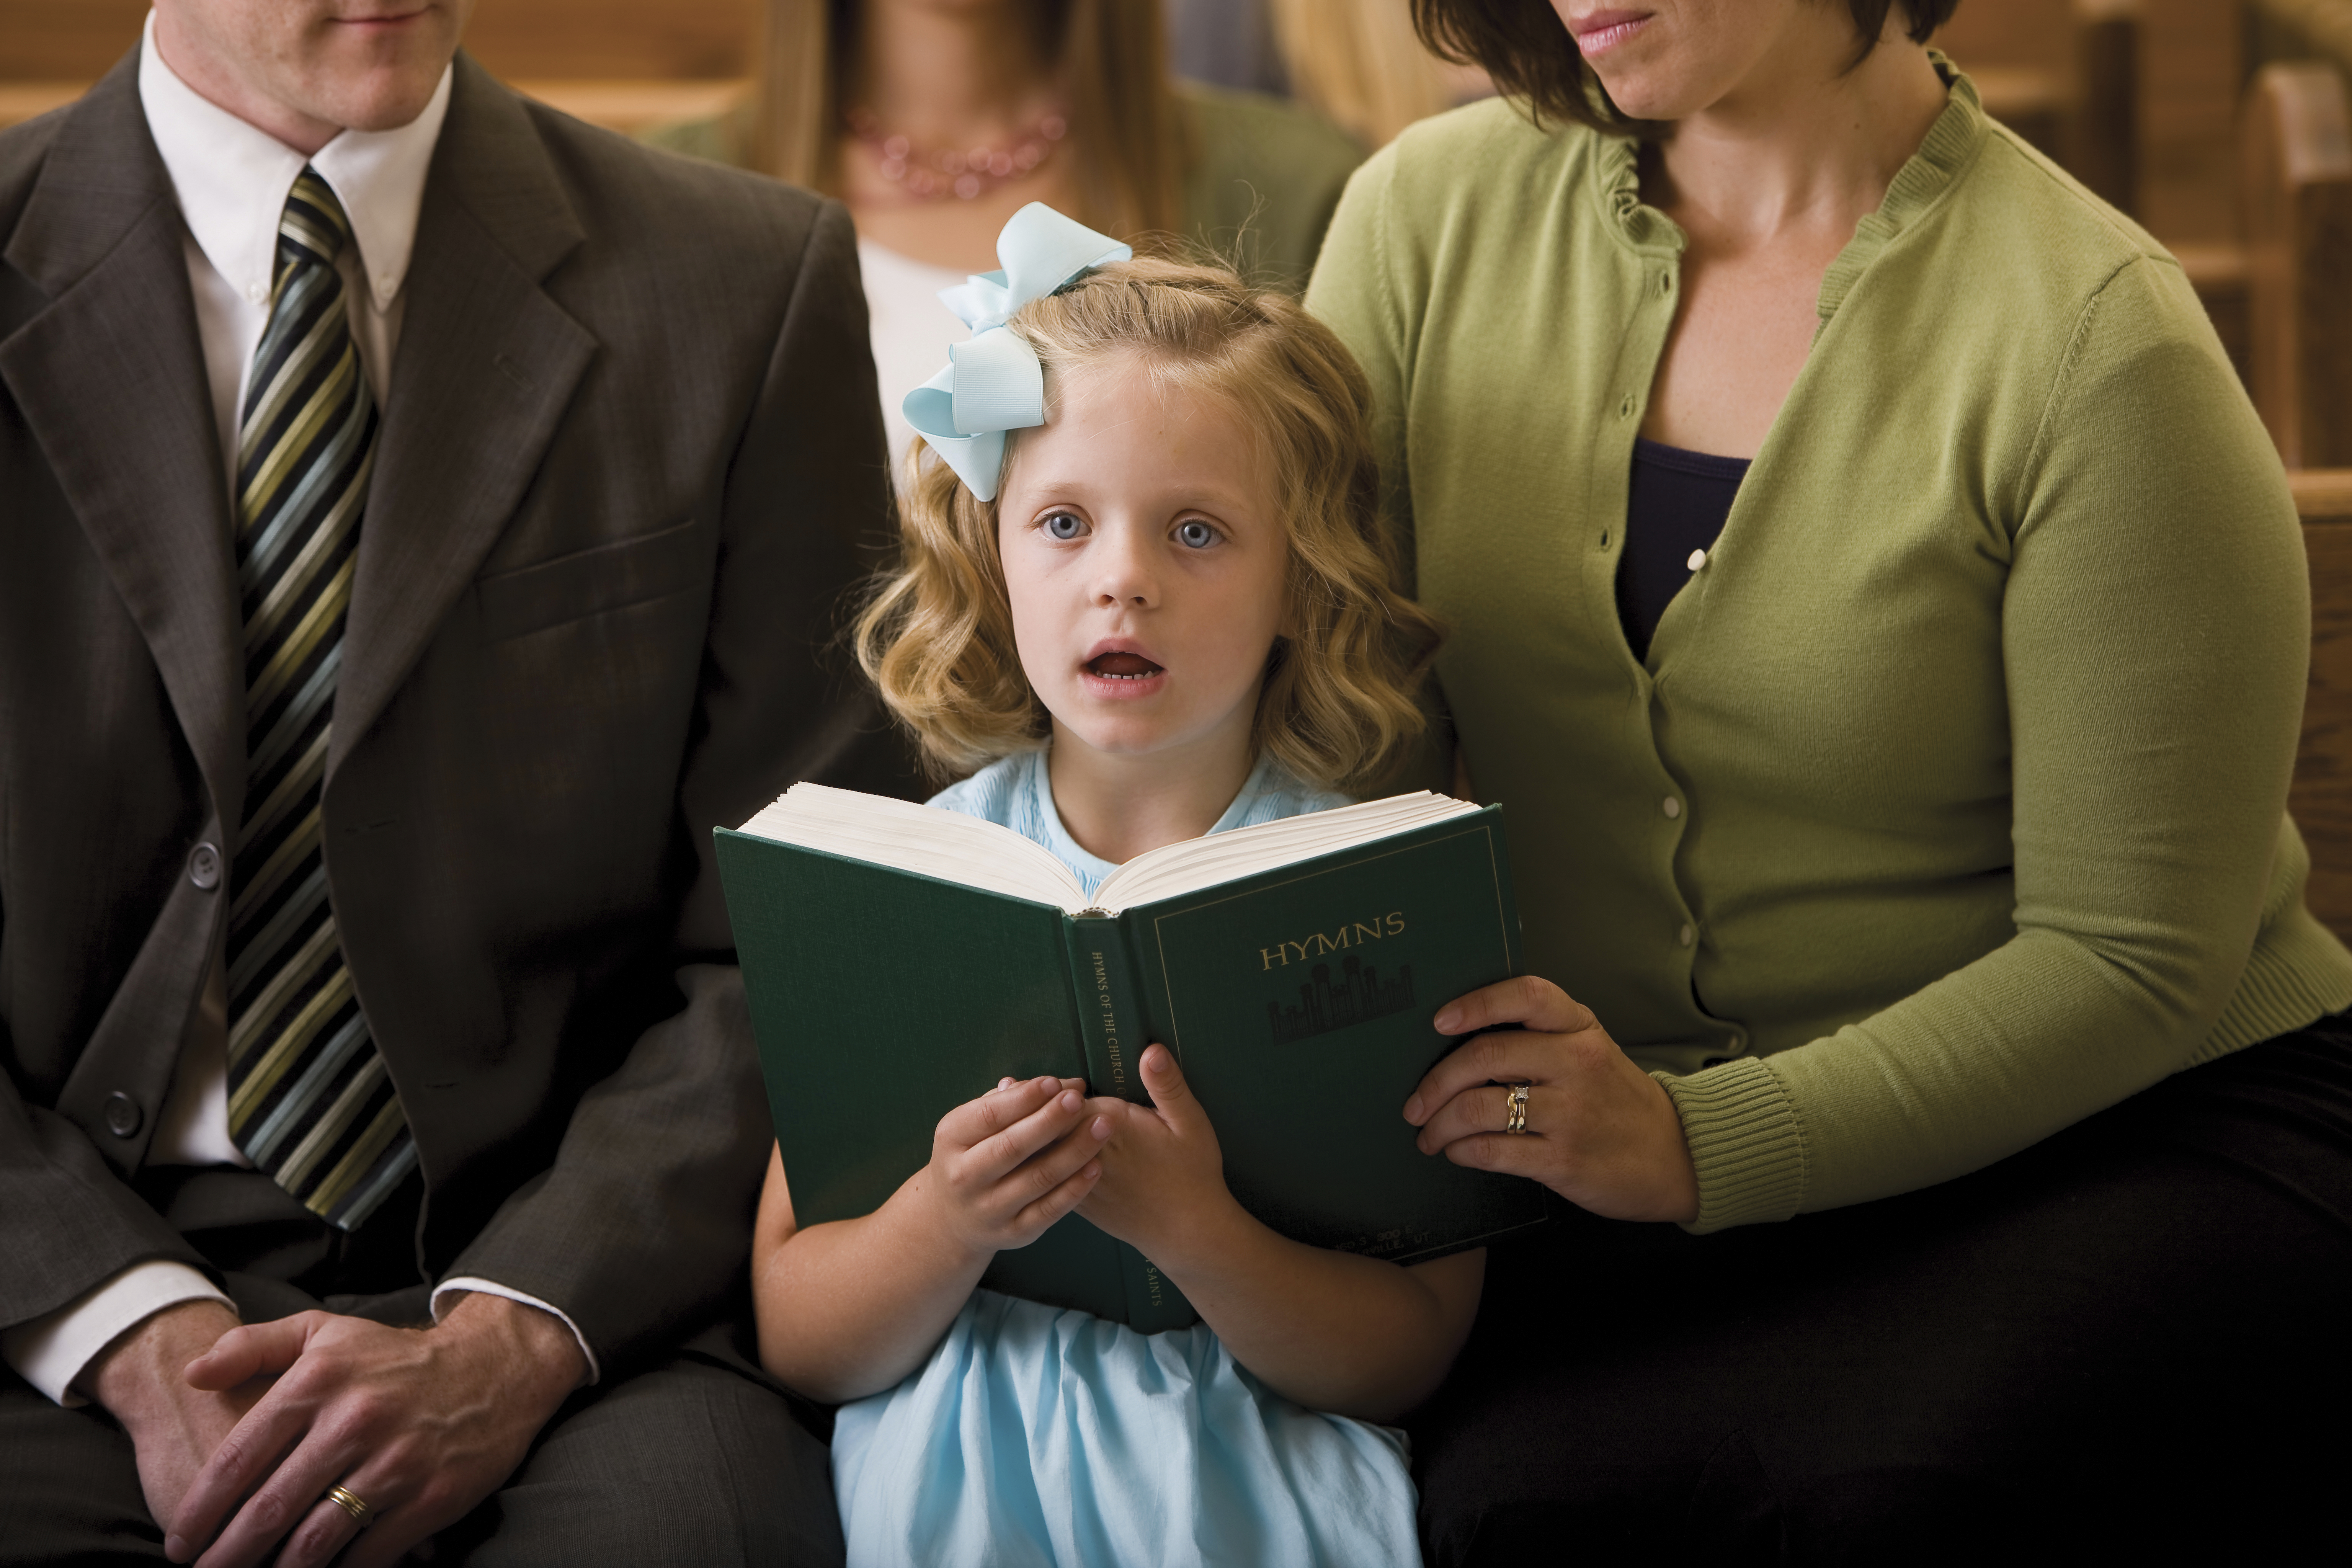 A young girl sings in Church while holding a hymnbook.